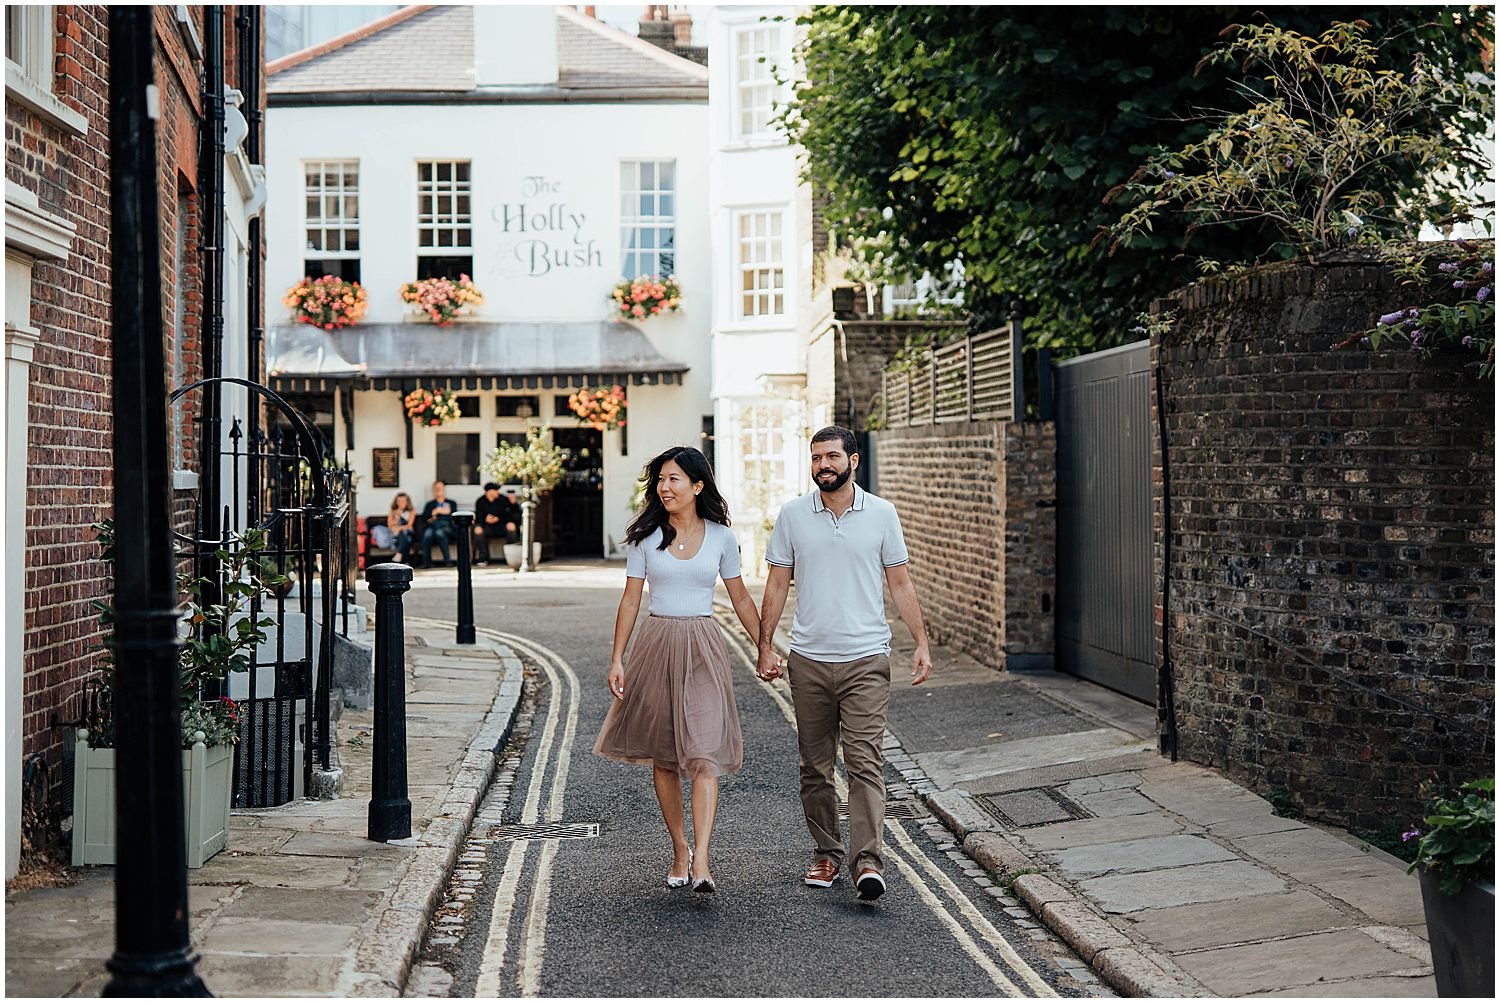 Engagement photos outside Holly Bush pub in Hampstead